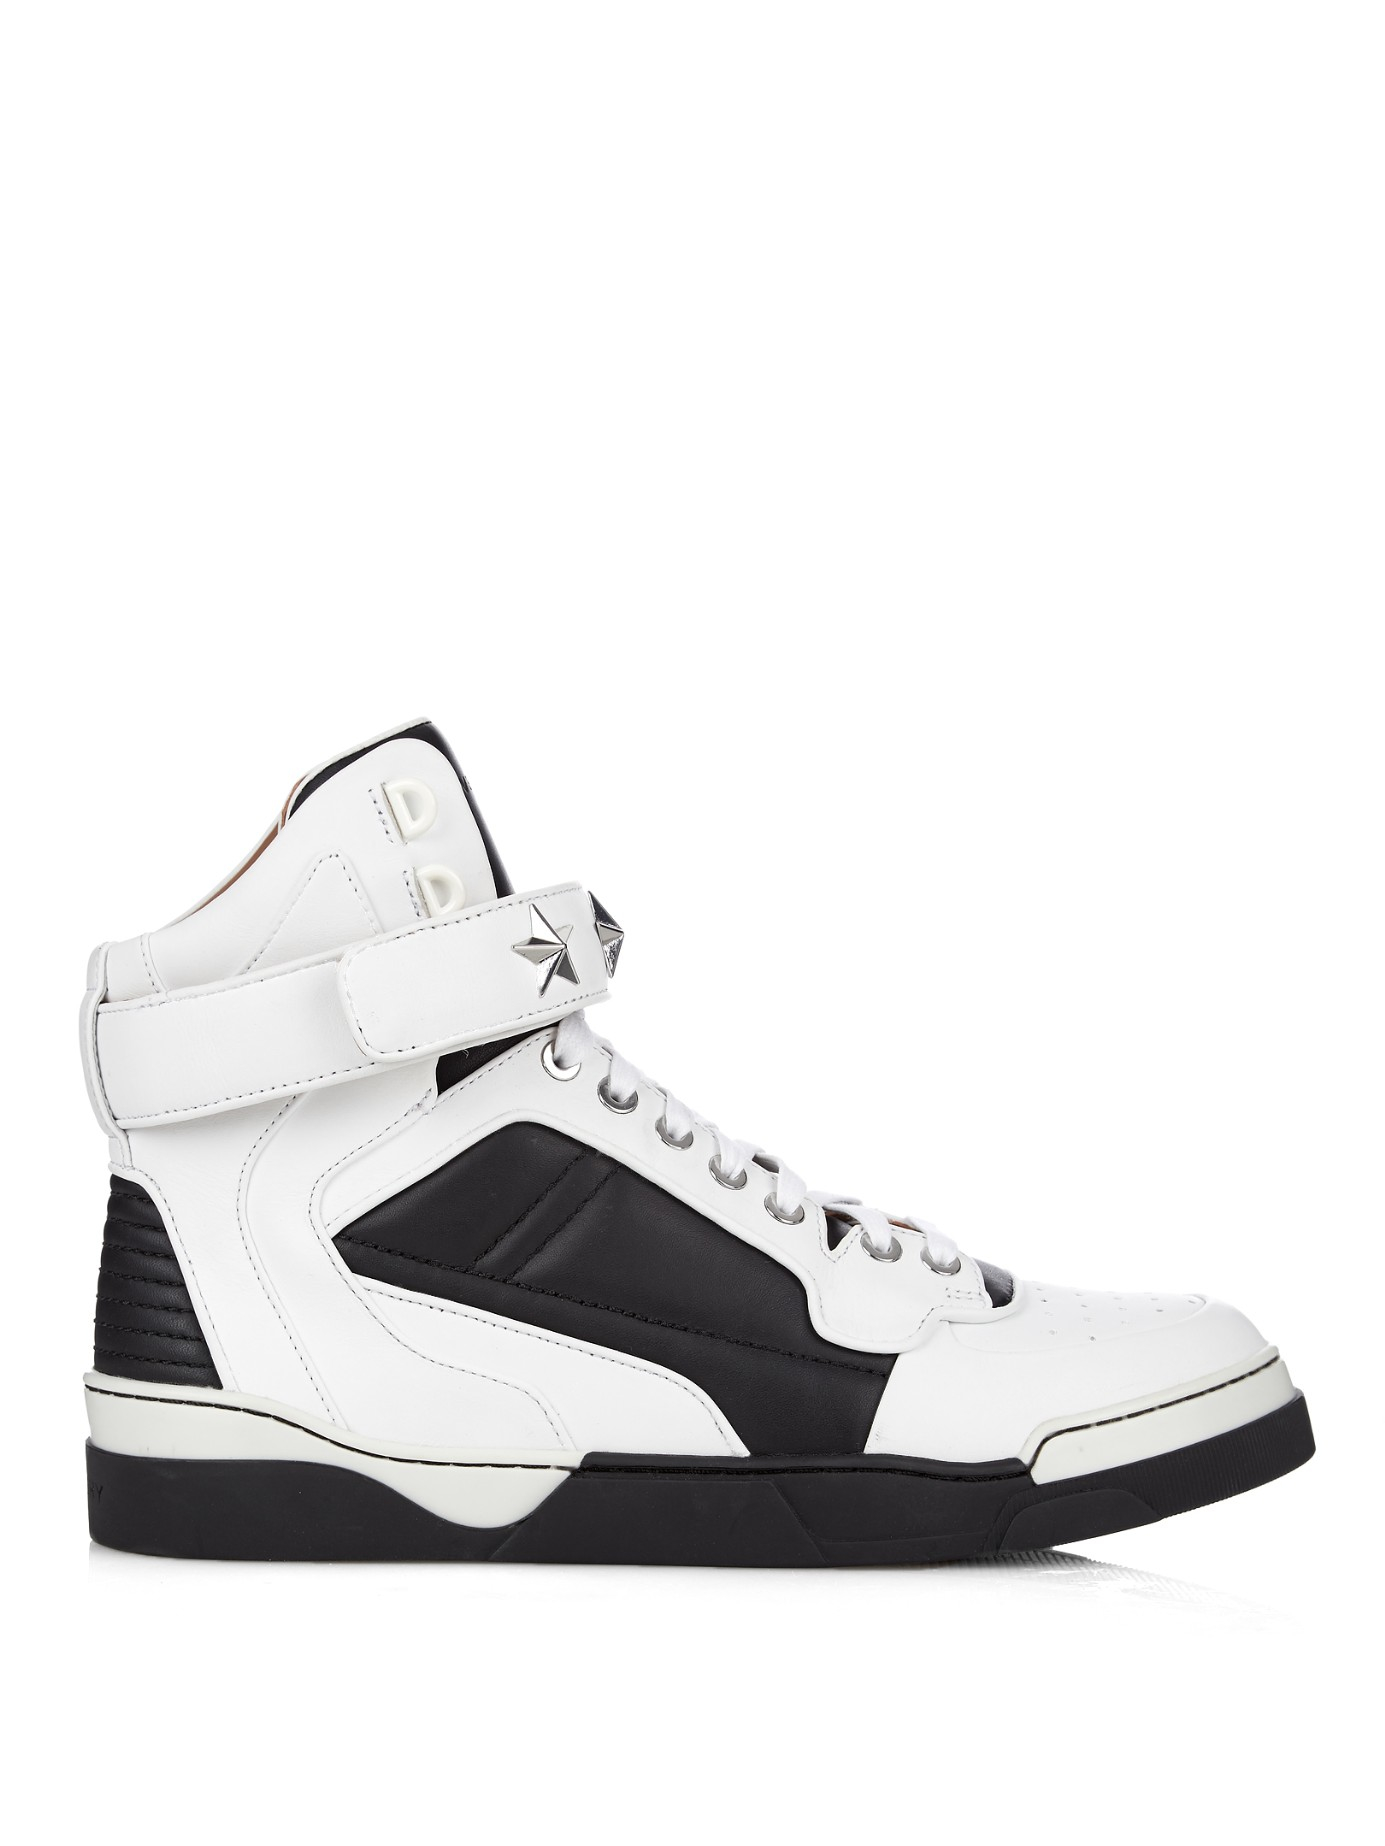 Givenchy Tyson Star-Studded Leather High-Top Sneakers in Black | Lyst